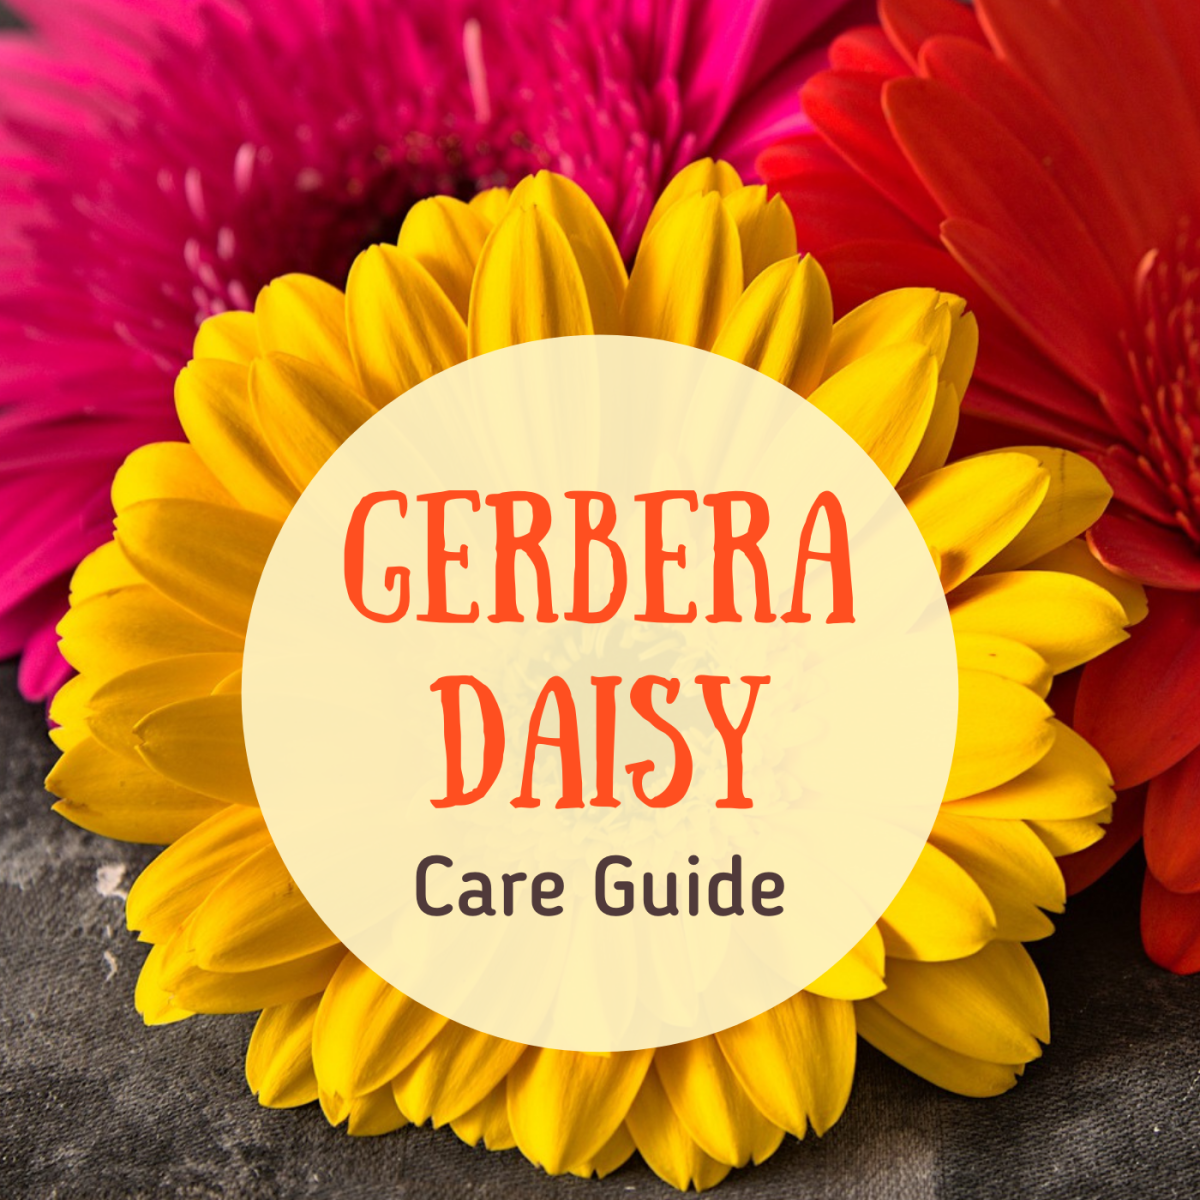 Gerbera daisies come in bright and pastel colored blooms.